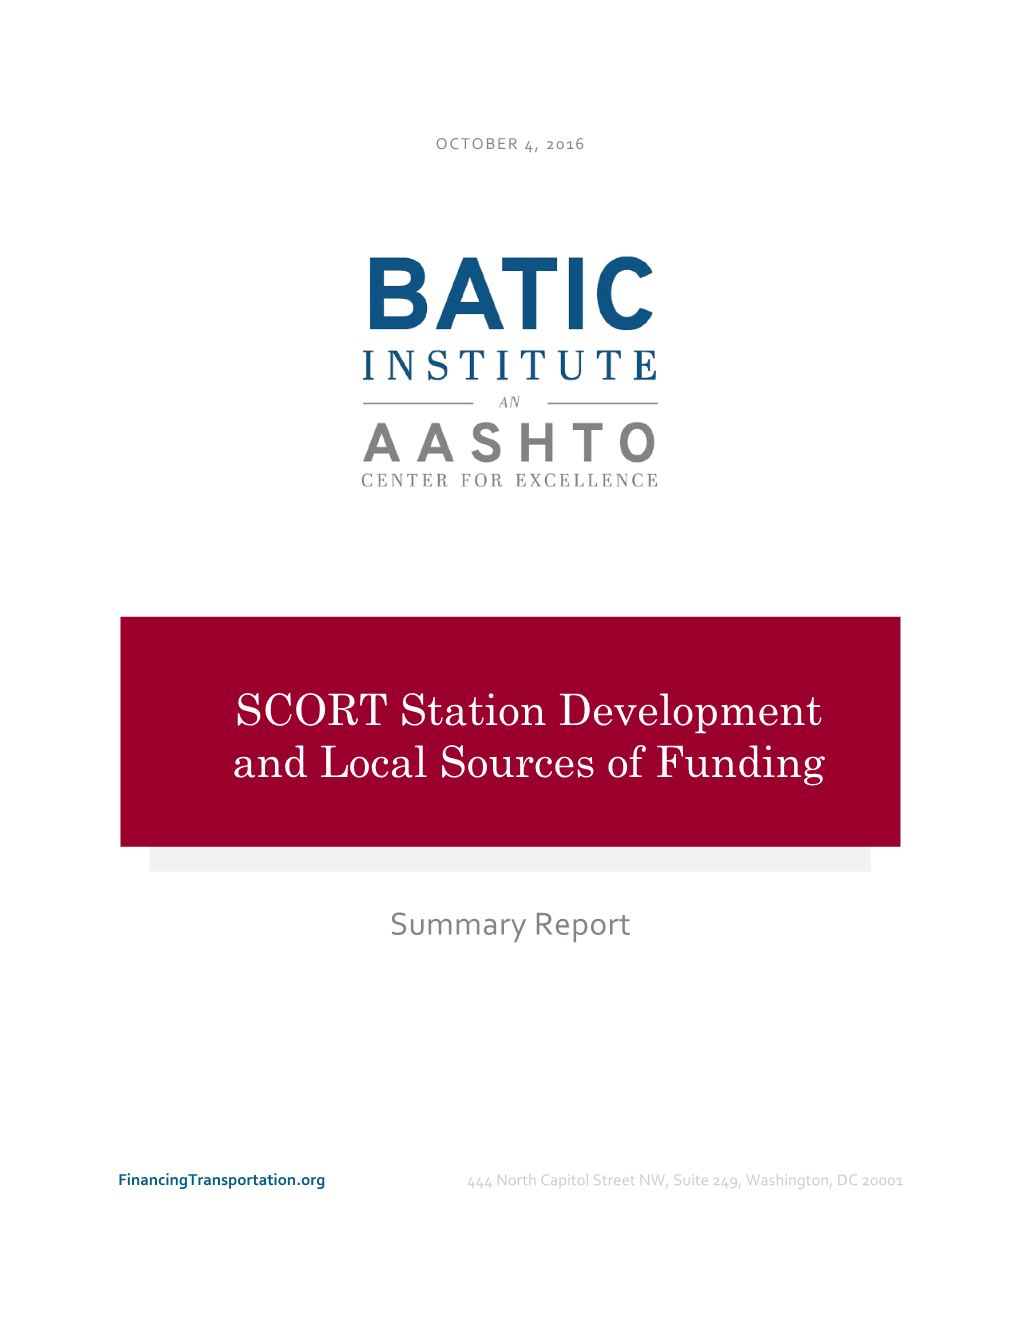 SCORT Station Development and Local Sources of Funding